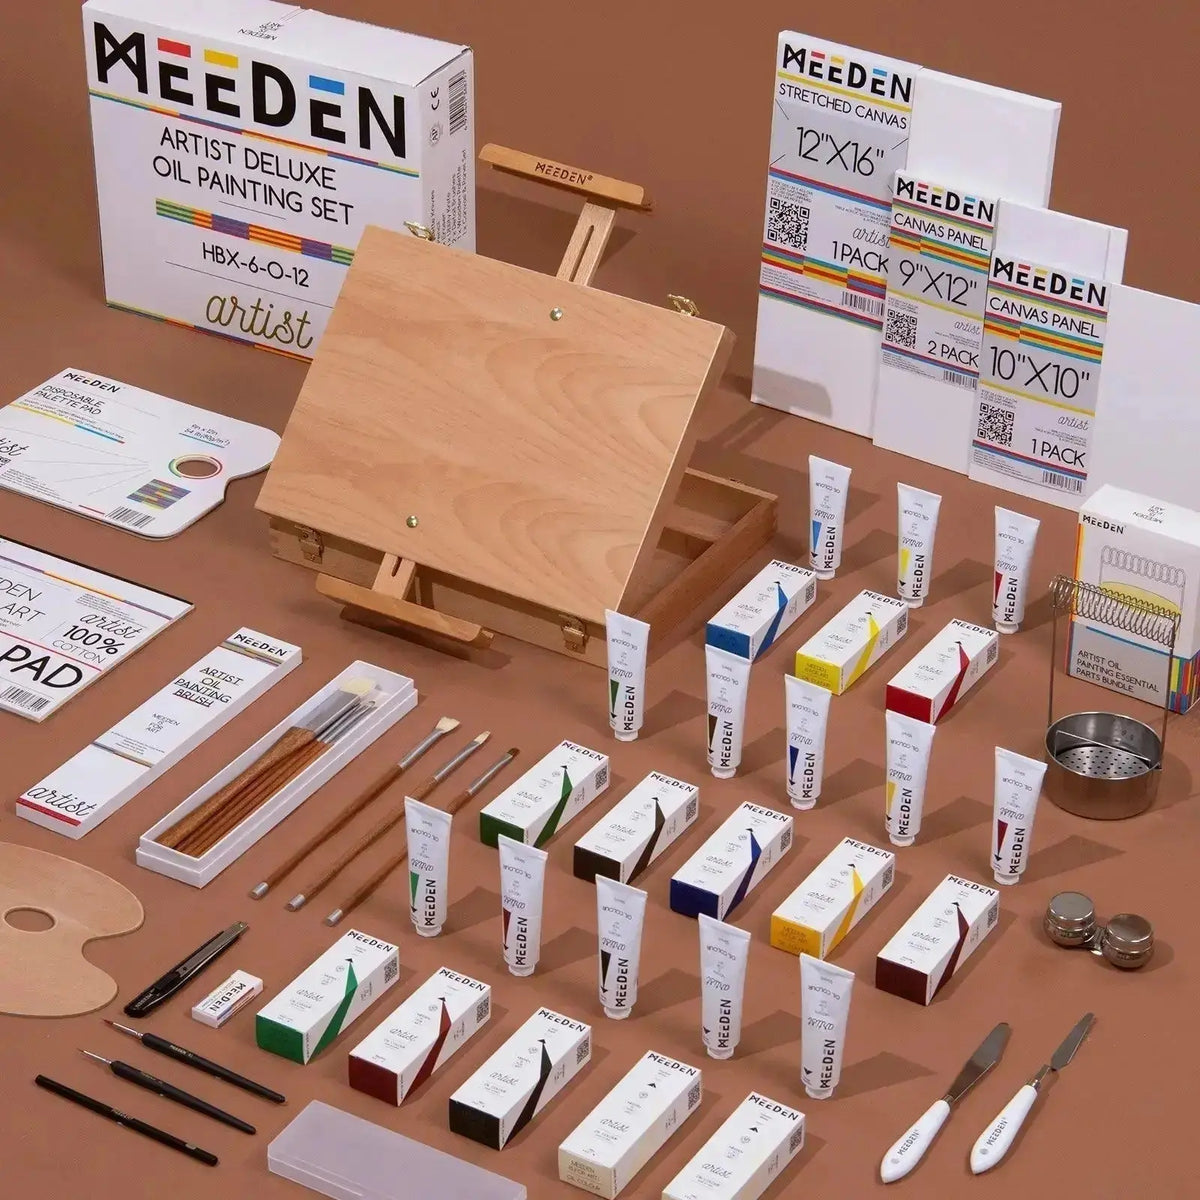 MEEDEN Oil Painting Set with French Easel,Oil Paint Set with Easel,7x100ml/3.38oz Oil Paint,Oil Paintbrushes,Canvas & Oil Painting Supplies for Adults